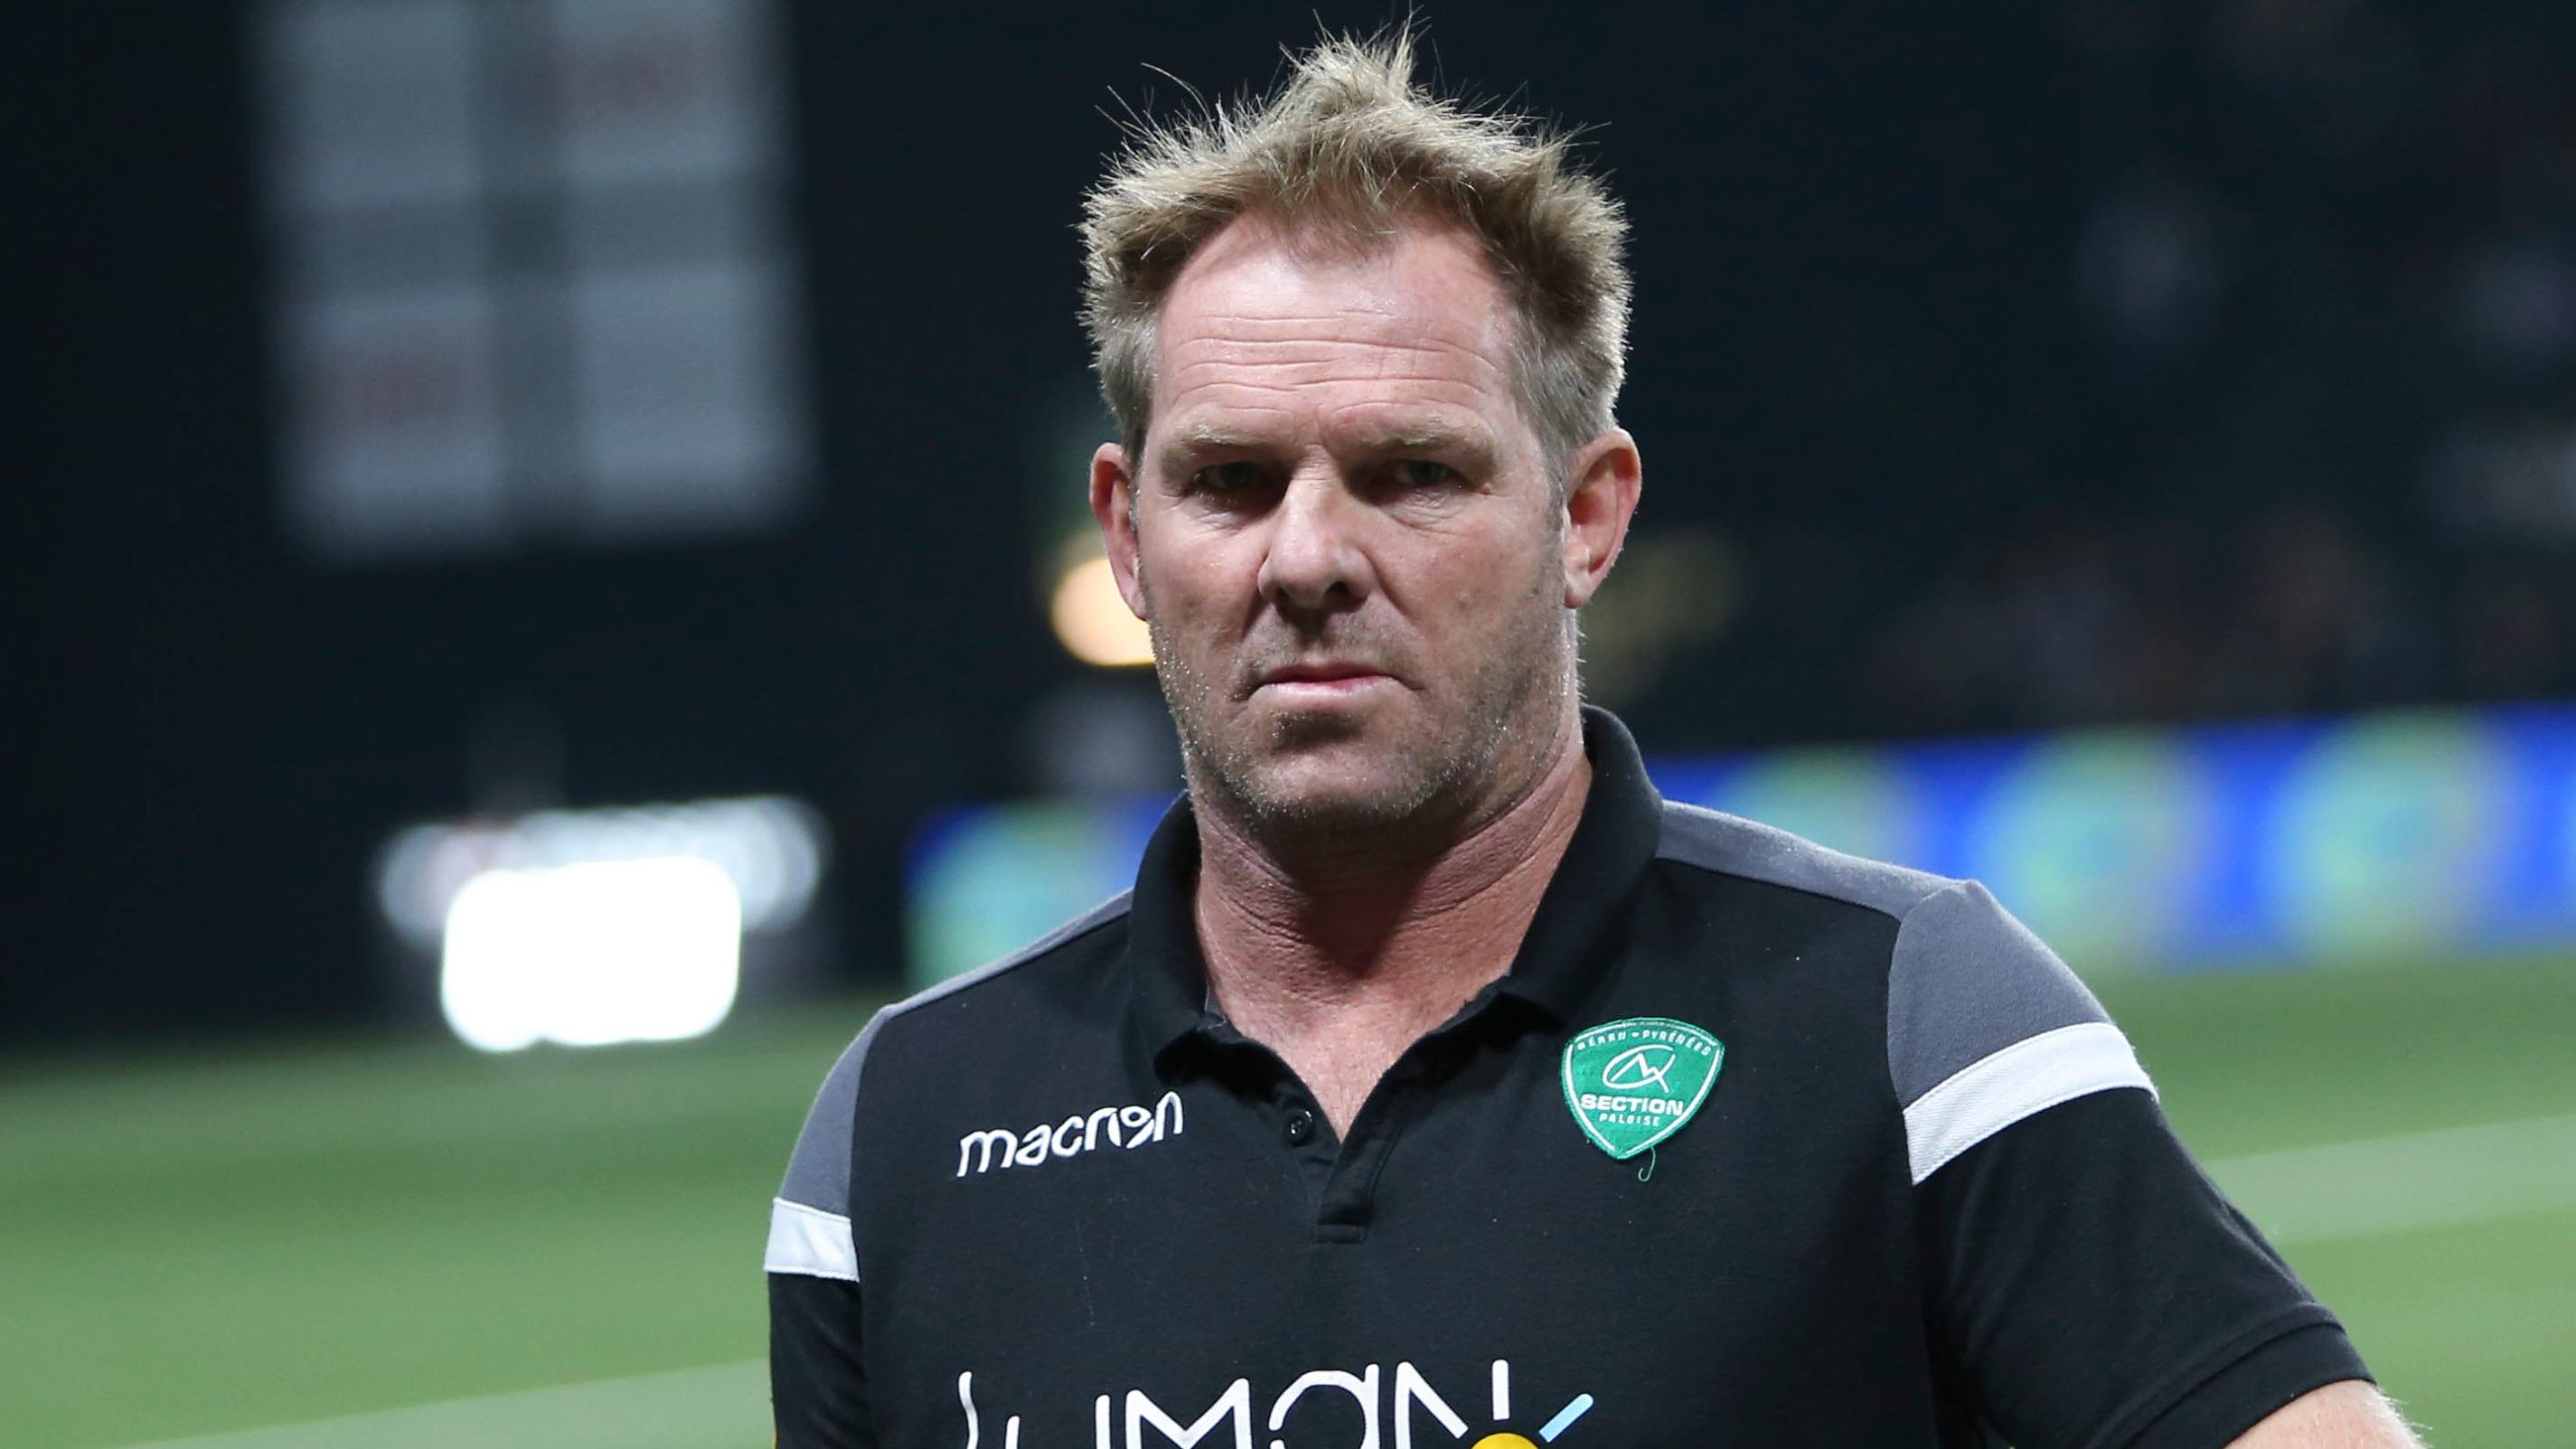 Pro D2: Mannix appointed to Biarritz this Wednesday, Clarkin remains as Director of Rugby